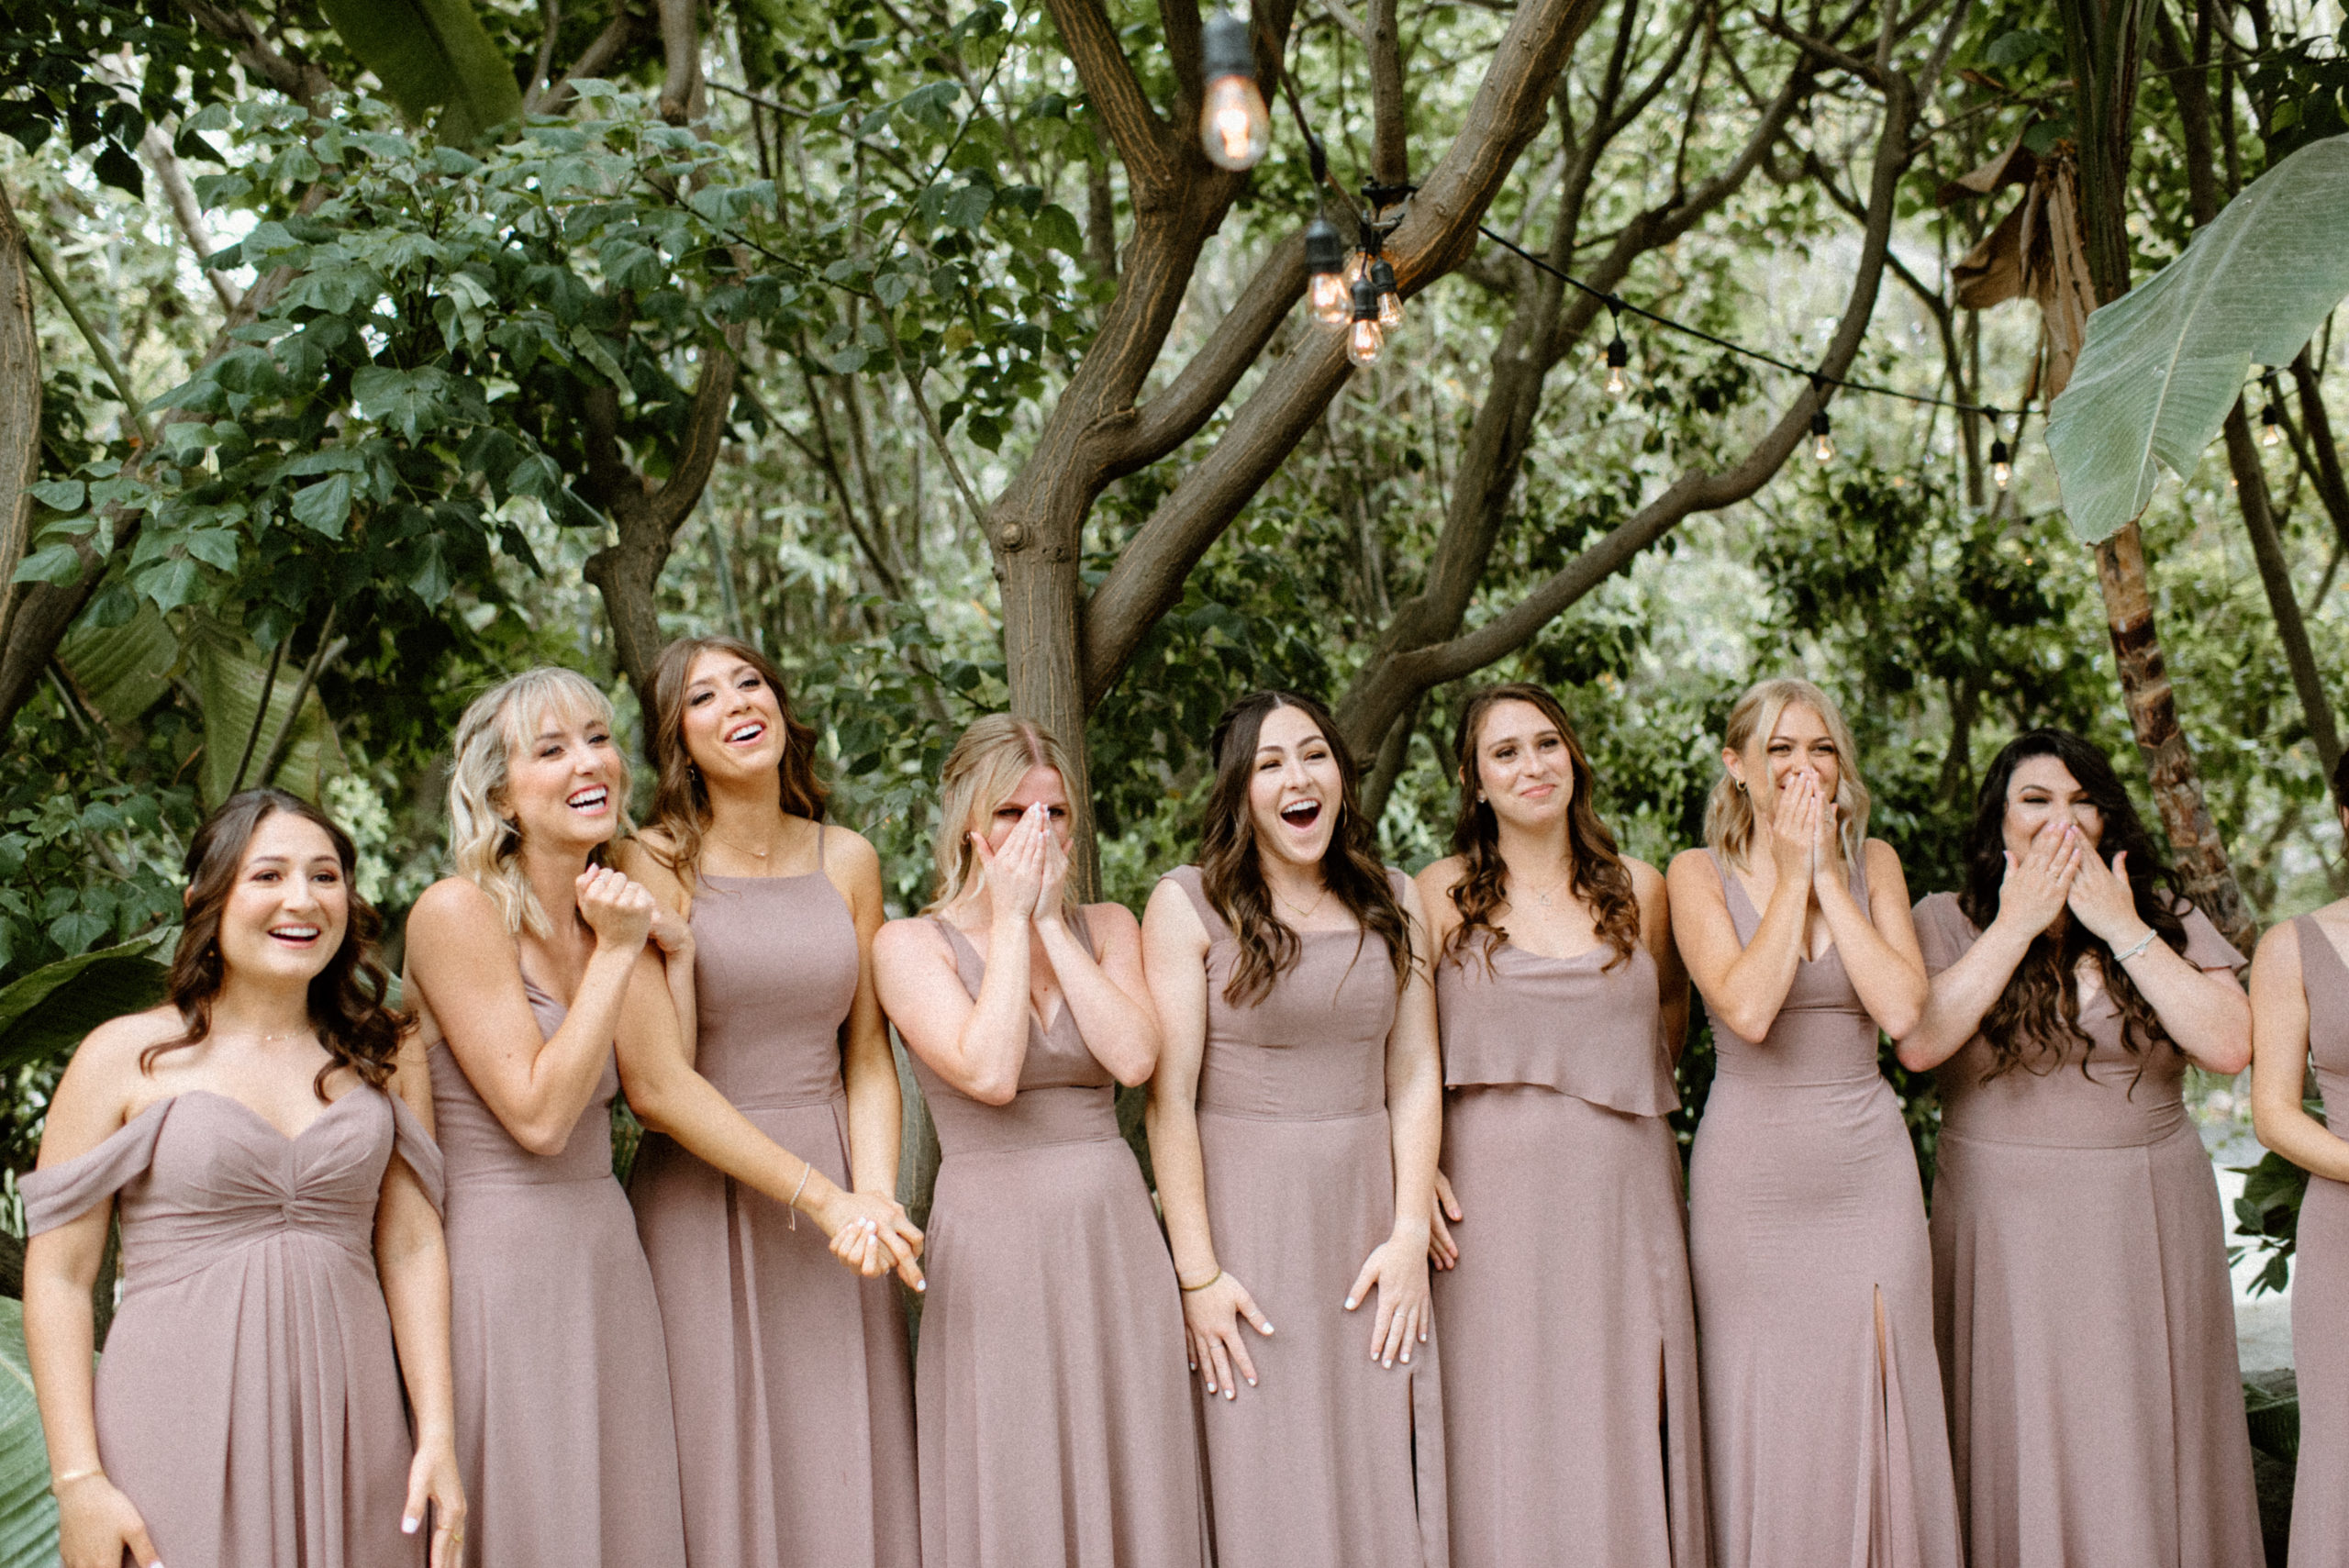 The bridesmaids seeing the bride for the first time! 